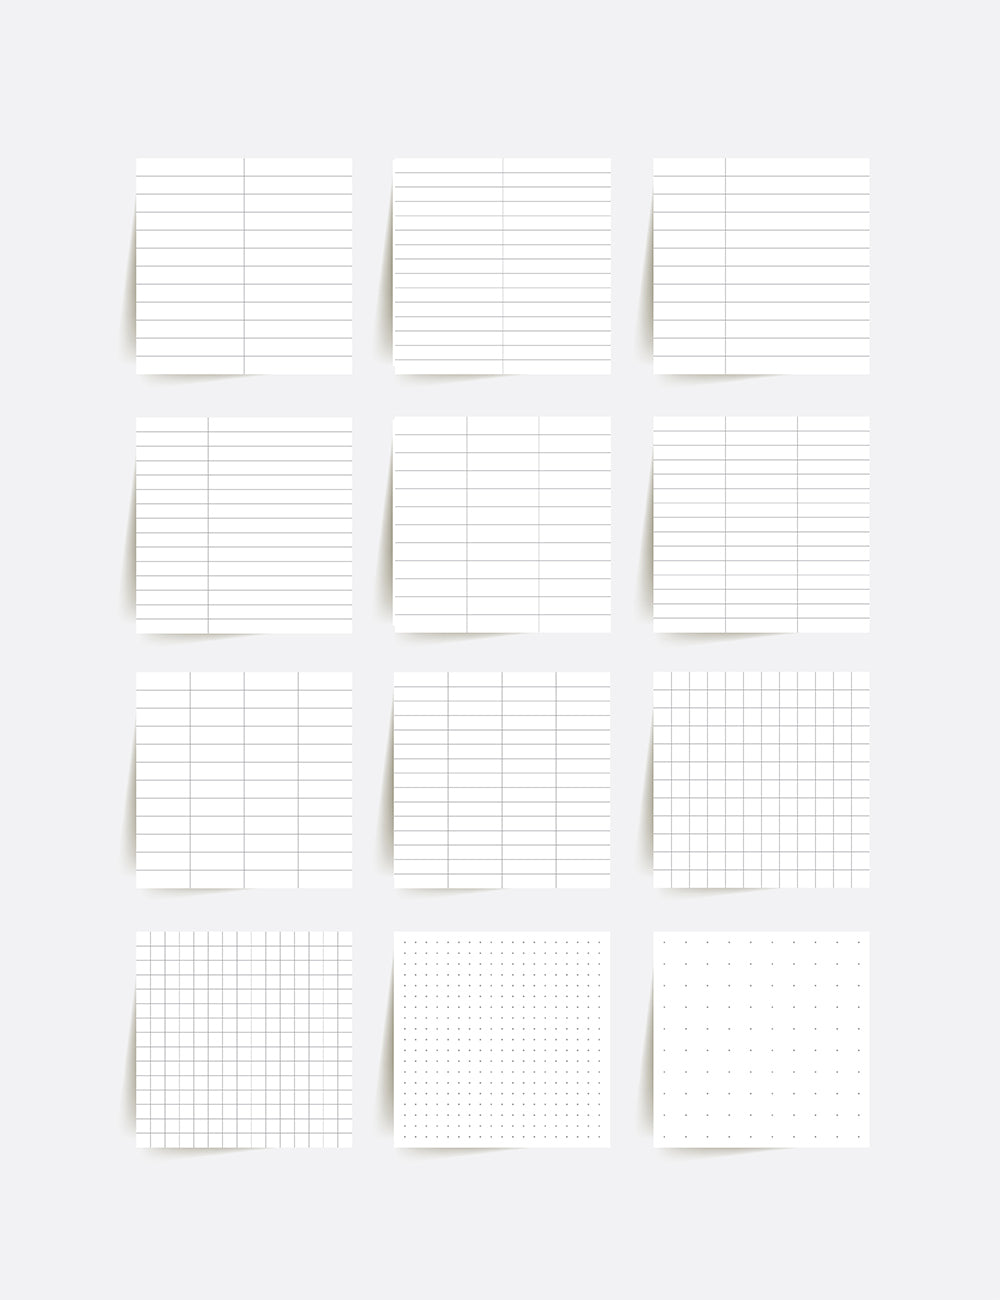 Printable Notes and Memo Cards | 3x3 | Printable Journal & Planner Cards | Notes | Lined, Dotted, Grid | Minimal Aesthetic | Clean Design | PAPER MOON Art & Design